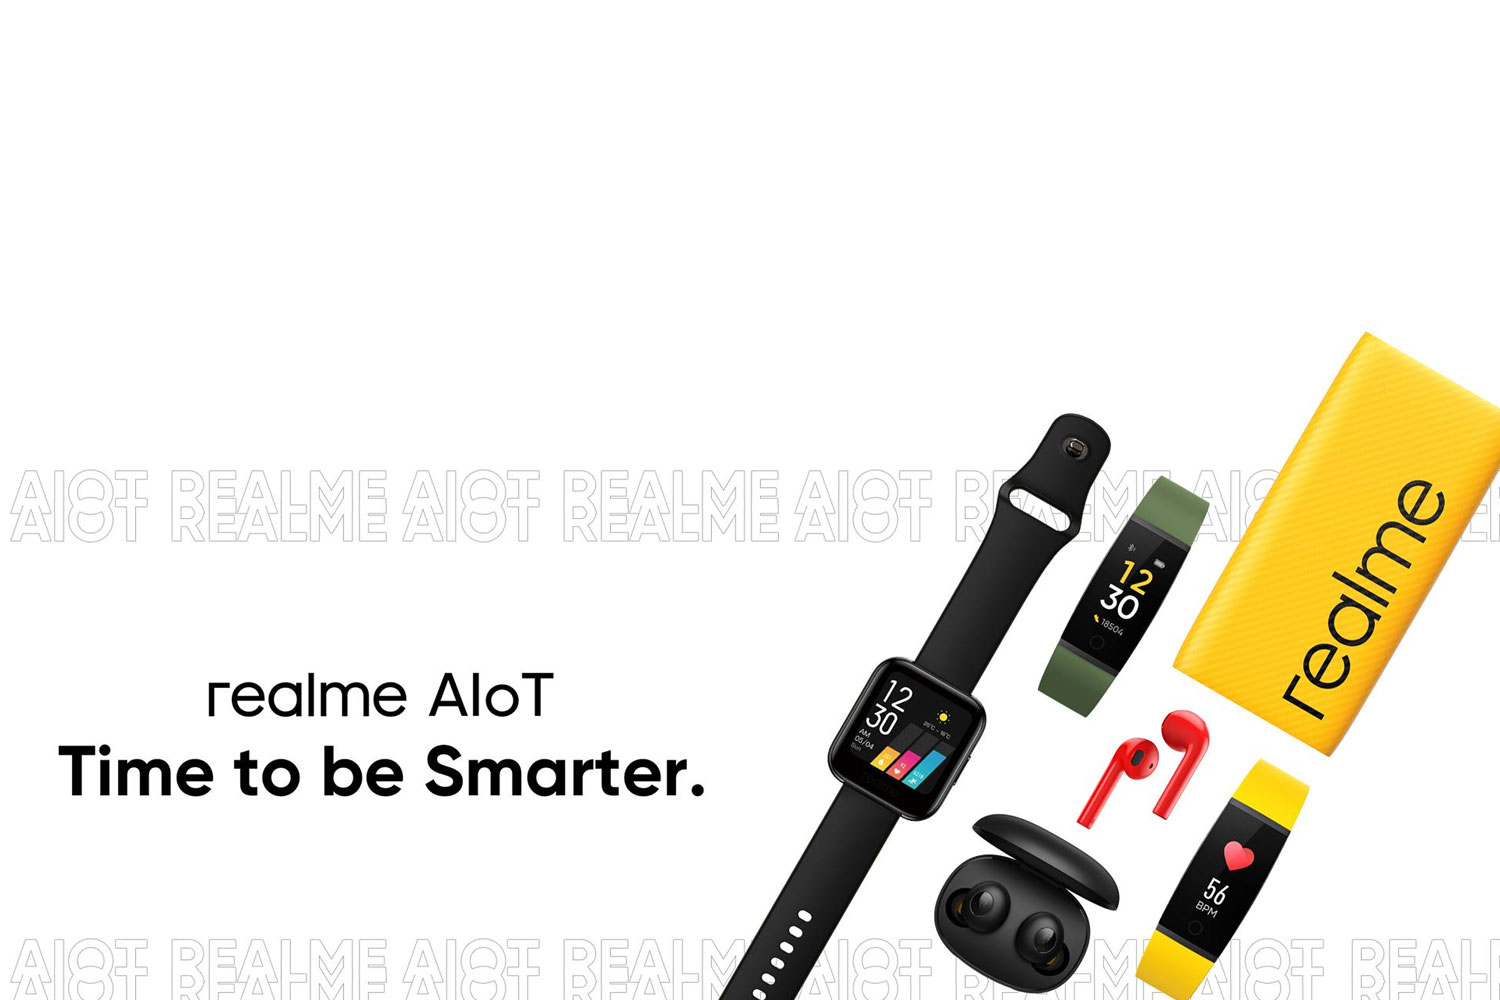 realme Malaysia Launches Latest Range of AIoT Devices